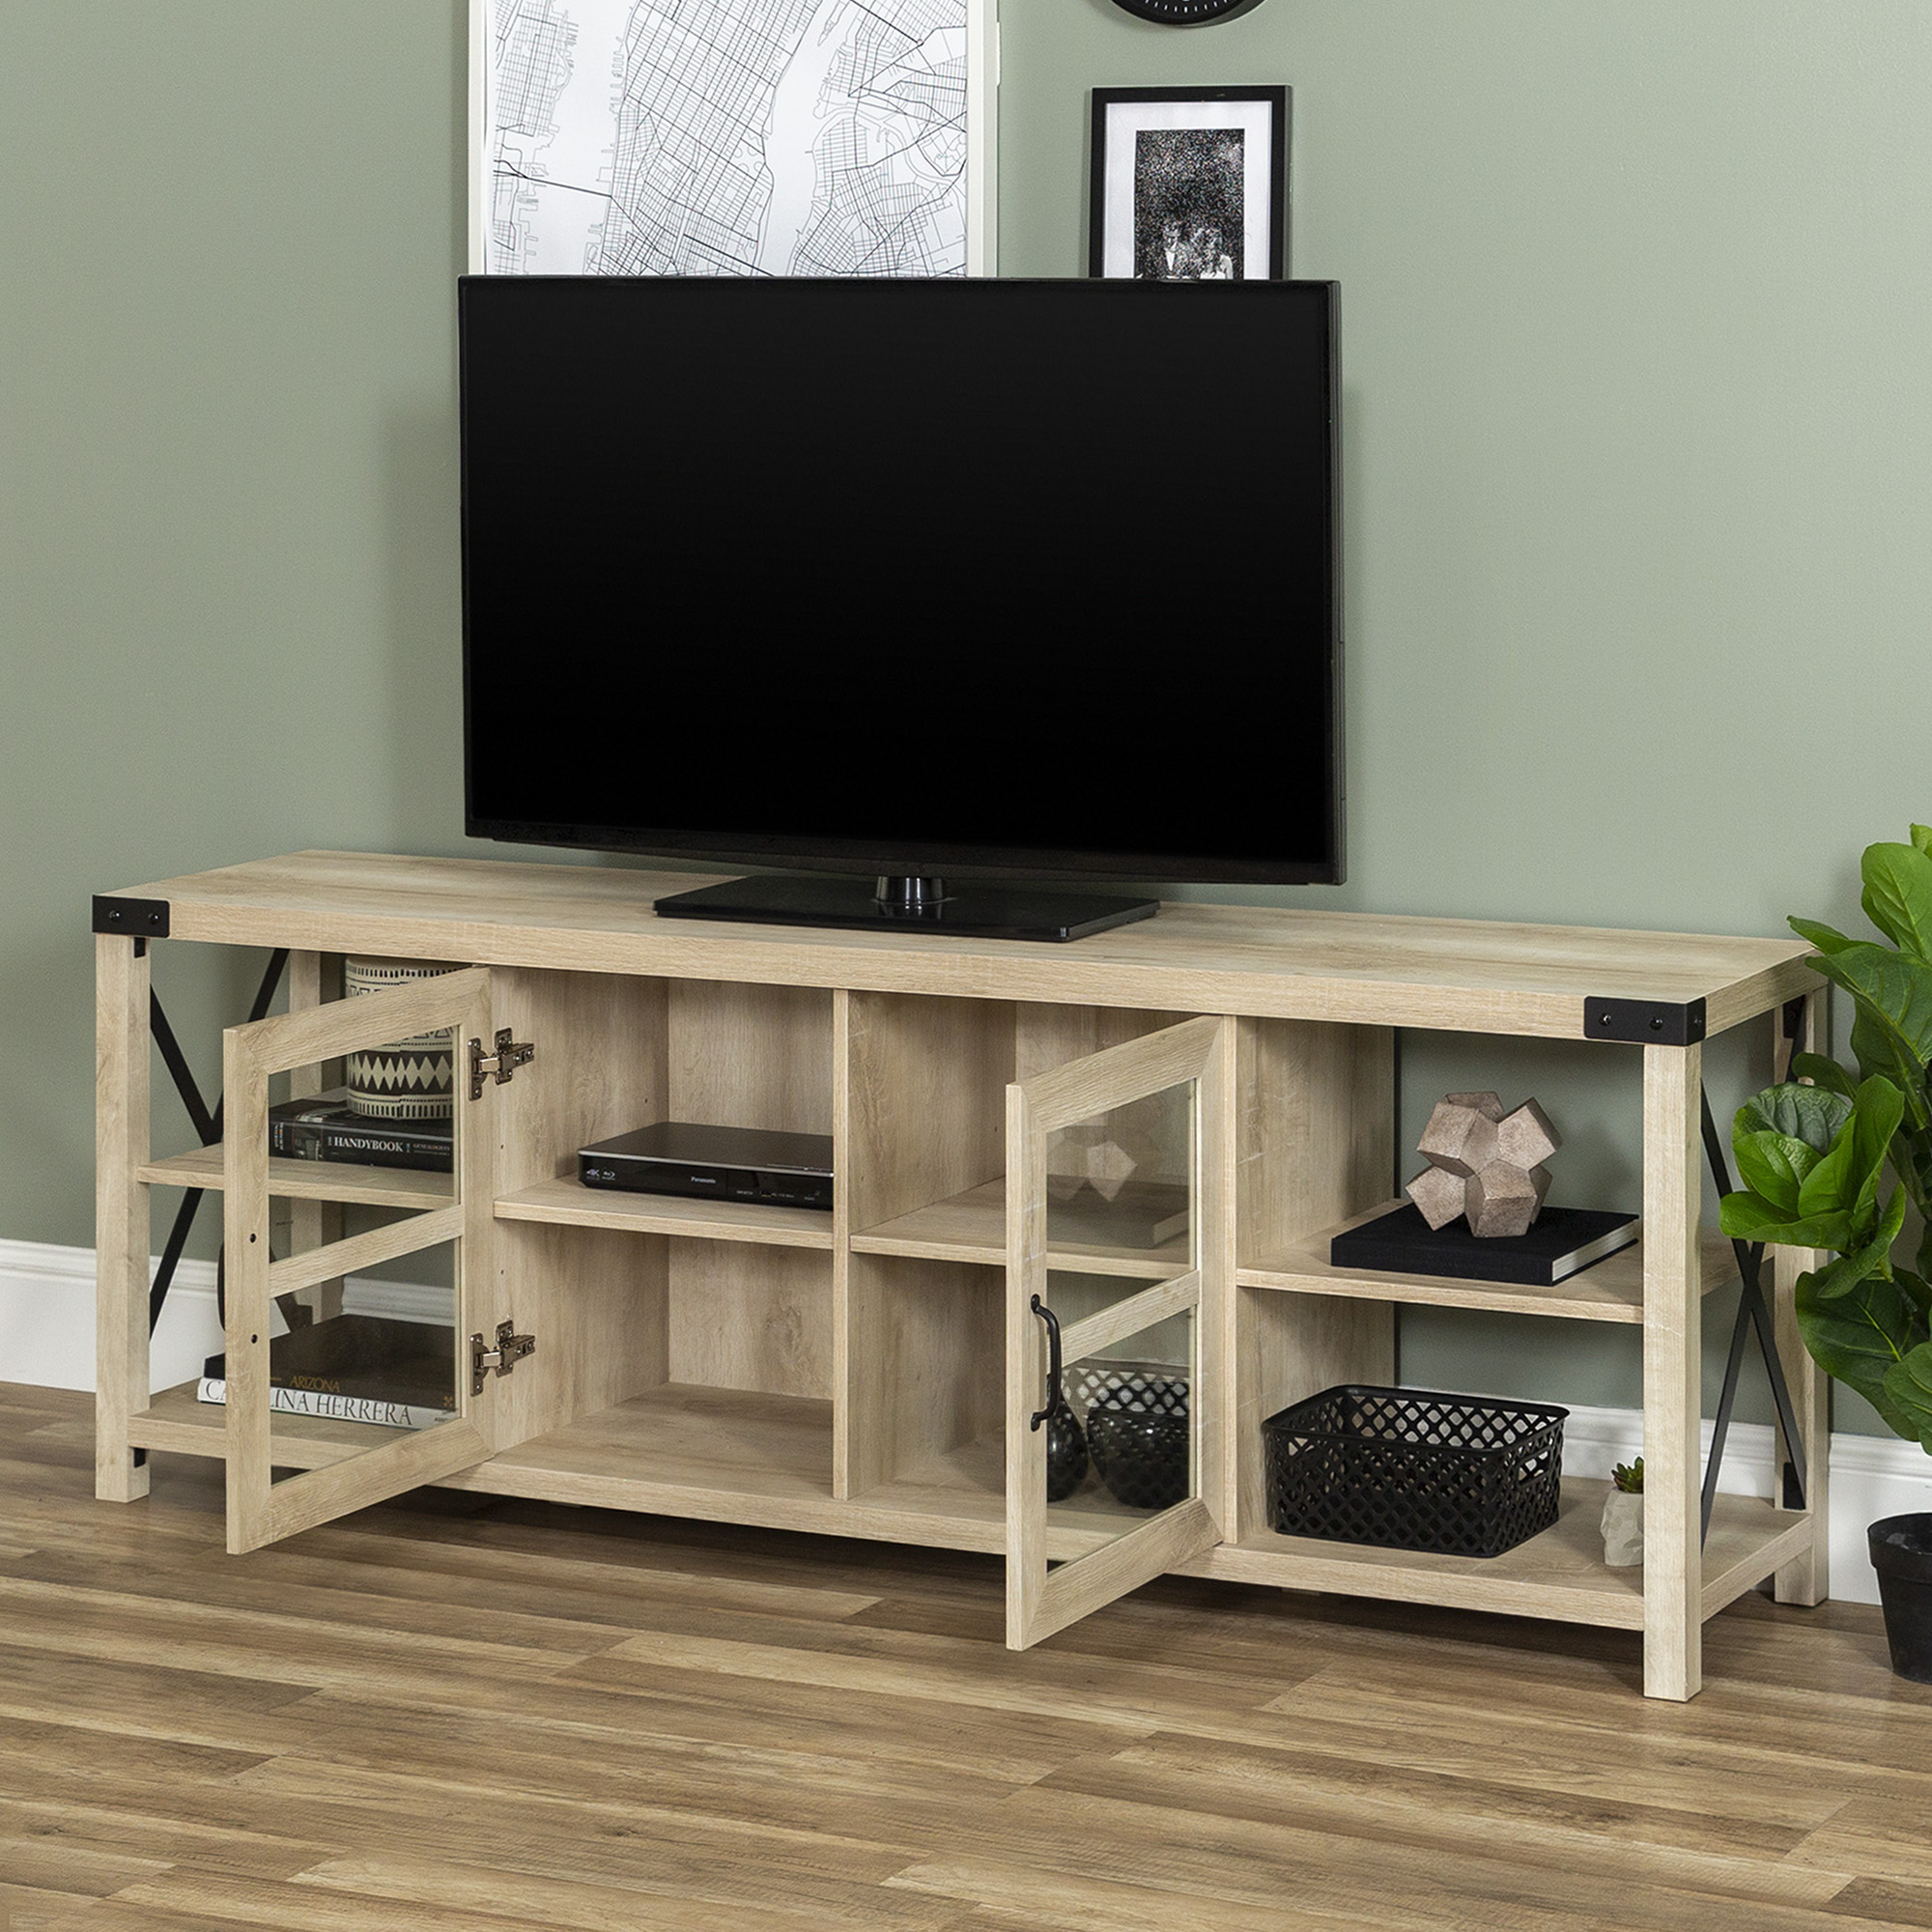 Woven Paths Farmhouse 2-Door Metal X TV Stand for TVs up to 80", White Oak - image 4 of 13